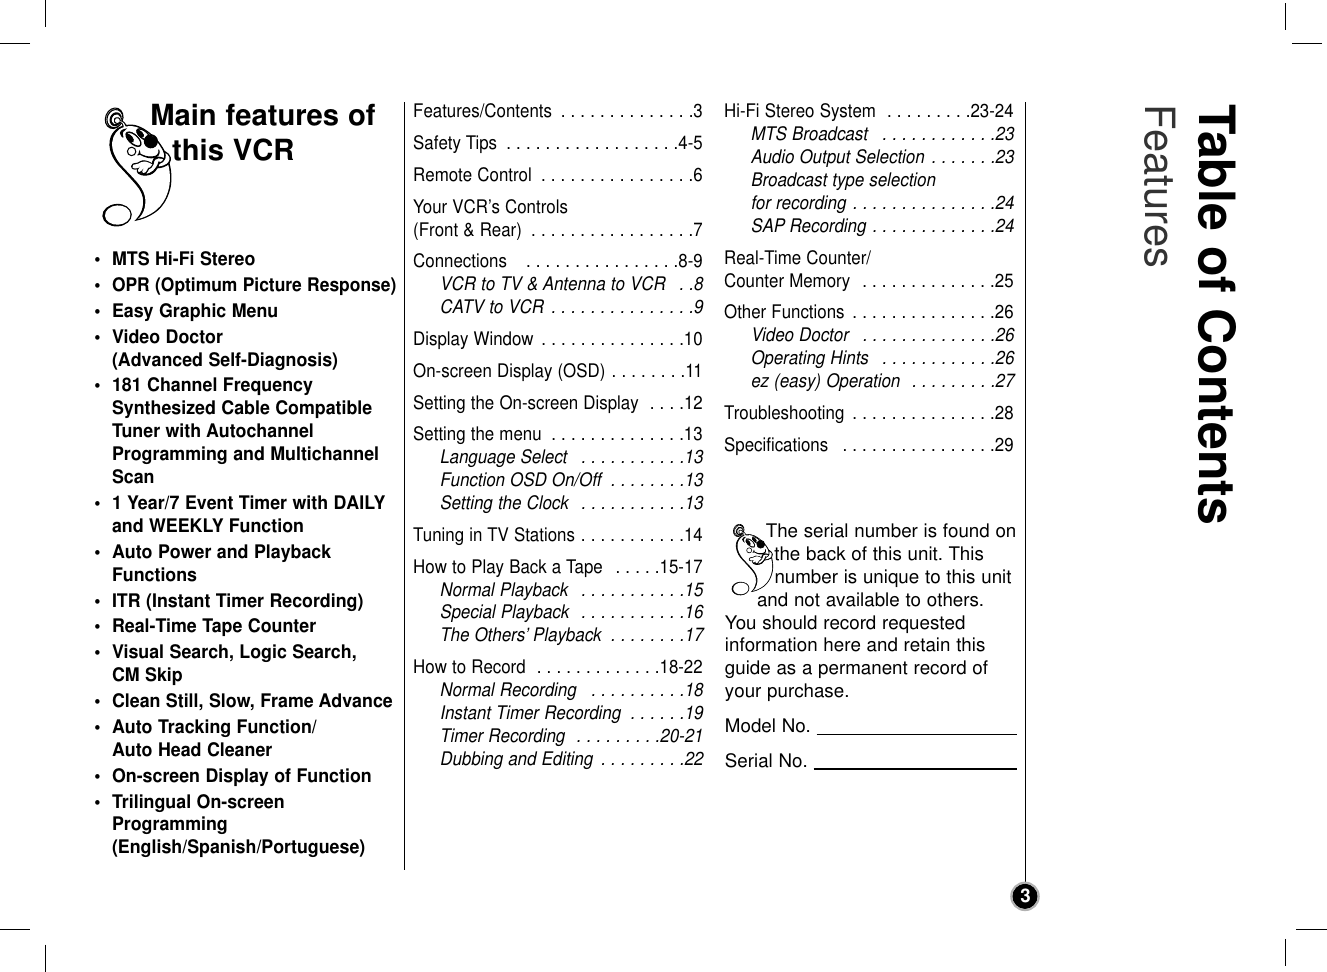 Table of Contents Features3• MTS Hi-Fi Stereo•OPR (Optimum Picture Response)• Easy Graphic Menu• Video Doctor (Advanced Self-Diagnosis)• 181 Channel FrequencySynthesized Cable CompatibleTuner with AutochannelProgramming and MultichannelScan• 1 Year/7 Event Timer with DAILYand WEEKLY Function• Auto Power and PlaybackFunctions• ITR (Instant Timer Recording)• Real-Time Tape Counter• Visual Search, Logic Search, CM Skip• Clean Still, Slow, Frame Advance• Auto Tracking Function/Auto Head Cleaner• On-screen Display of Function• Trilingual On-screenProgramming(English/Spanish/Portuguese)Features/Contents  . . . . . . . . . . . . . .3Safety Tips  . . . . . . . . . . . . . . . . . .4-5Remote Control  . . . . . . . . . . . . . . . .6Your VCR’s Controls (Front &amp; Rear)  . . . . . . . . . . . . . . . . .7Connections   . . . . . . . . . . . . . . . .8-9VCR to TV &amp; Antenna to VCR  . .8CATV to VCR  . . . . . . . . . . . . . . .9Display Window  . . . . . . . . . . . . . . .10On-screen Display (OSD) . . . . . . . .11Setting the On-screen Display  . . . .12Setting the menu  . . . . . . . . . . . . . .13Language Select  . . . . . . . . . . .13Function OSD On/Off  . . . . . . . .13Setting the Clock  . . . . . . . . . . .13Tuning in TV Stations . . . . . . . . . . .14How to Play Back a Tape  . . . . .15-17Normal Playback  . . . . . . . . . . .15Special Playback  . . . . . . . . . . .16The Others’ Playback  . . . . . . . .17How to Record  . . . . . . . . . . . . .18-22Normal Recording  . . . . . . . . . .18Instant Timer Recording  . . . . . .19Timer Recording  . . . . . . . . .20-21Dubbing and Editing  . . . . . . . . .22Hi-Fi Stereo System  . . . . . . . . .23-24MTS Broadcast  . . . . . . . . . . . .23Audio Output Selection . . . . . . .23Broadcast type selection for recording . . . . . . . . . . . . . . .24SAP Recording . . . . . . . . . . . . .24Real-Time Counter/Counter Memory  . . . . . . . . . . . . . .25Other Functions  . . . . . . . . . . . . . . .26Video Doctor  . . . . . . . . . . . . . .26Operating Hints  . . . . . . . . . . . .26ez (easy) Operation  . . . . . . . . .27Troubleshooting  . . . . . . . . . . . . . . .28Specifications  . . . . . . . . . . . . . . . .29Main features ofthis VCRThe serial number is found onthe back of this unit. Thisnumber is unique to this unitand not available to others.You should record requested information here and retain thisguide as a permanent record ofyour purchase.Model No. Serial No. 